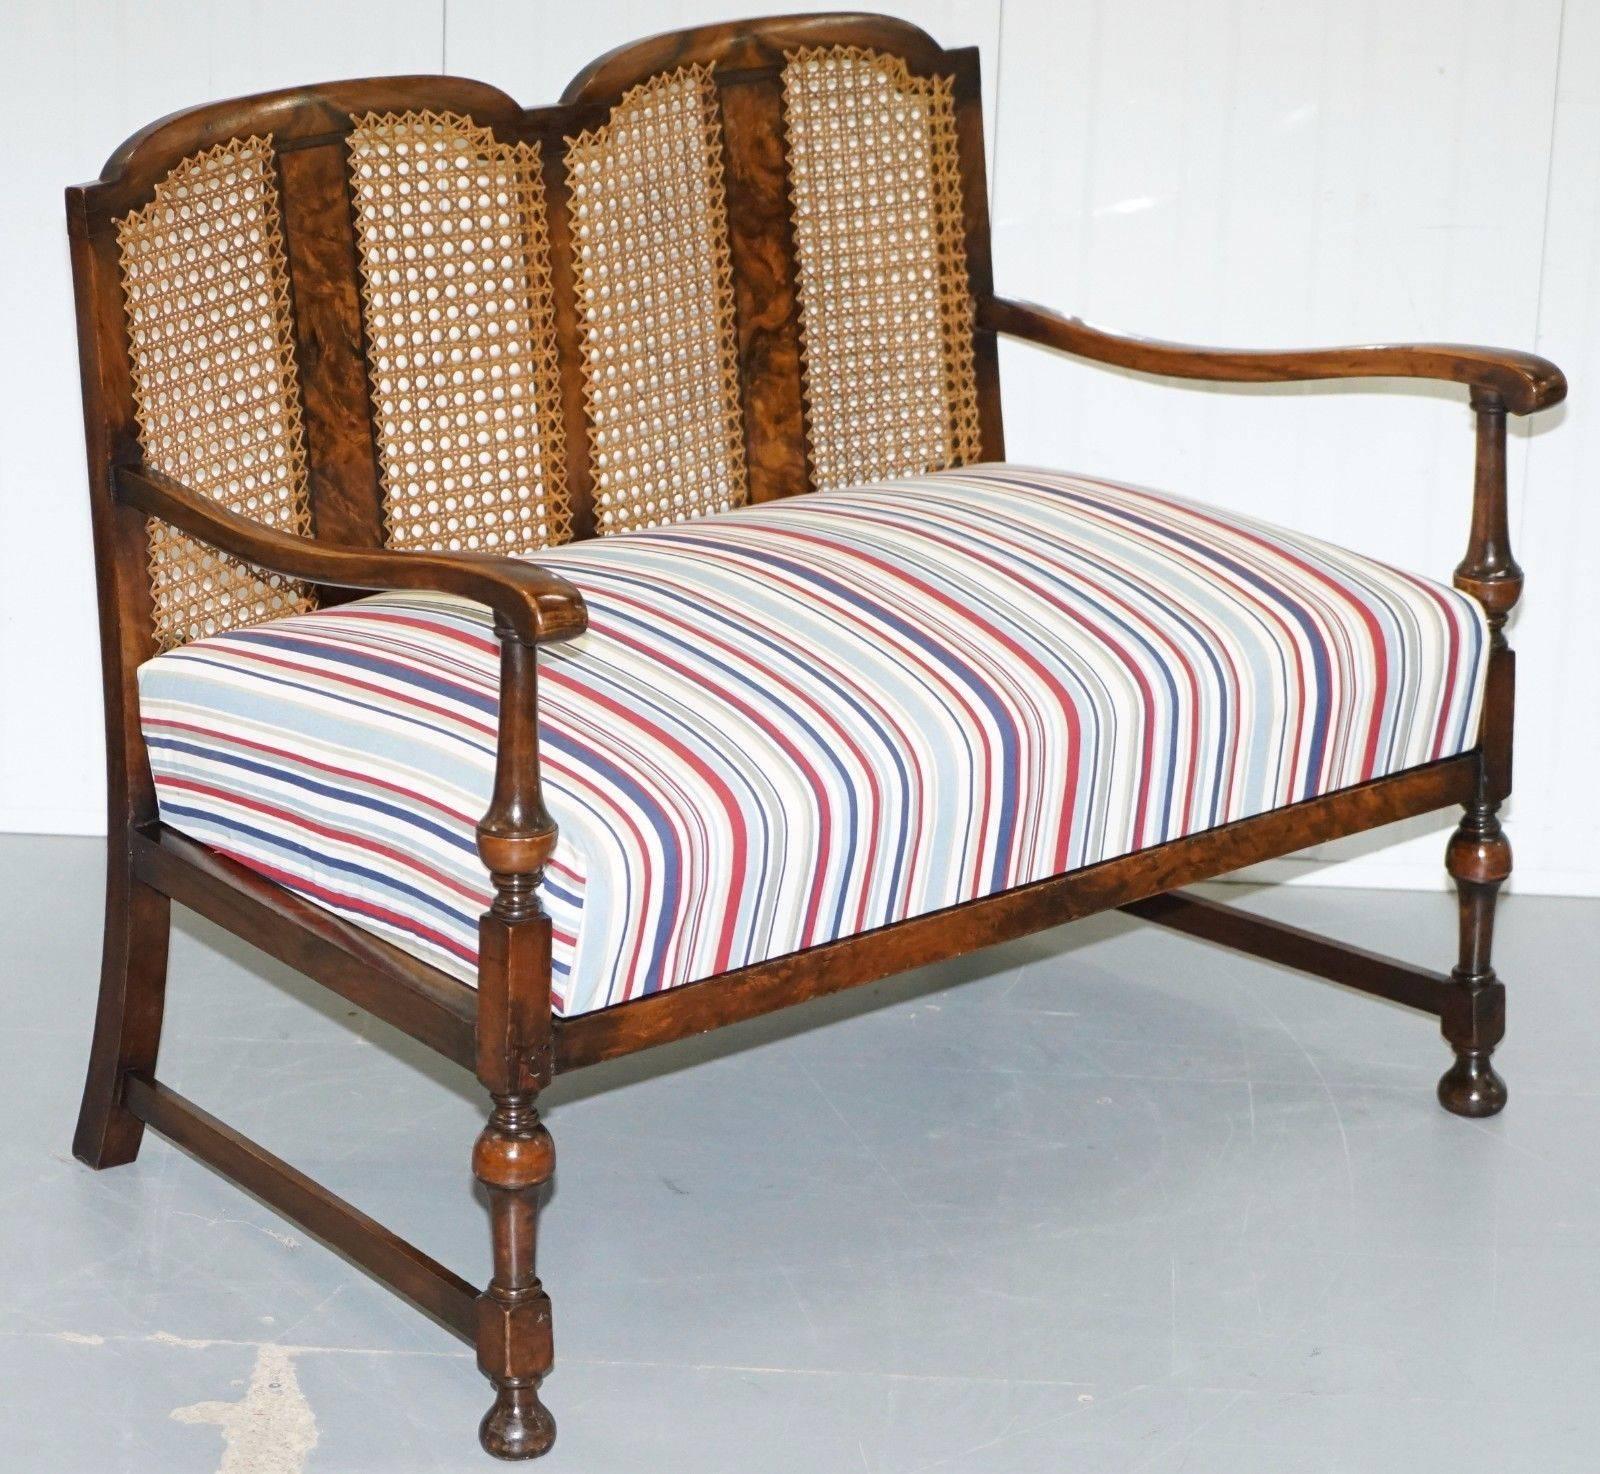 20th Century Vintage Suite Walnut & Cane Armchair and Bench Sofa Liberty William Morris Style